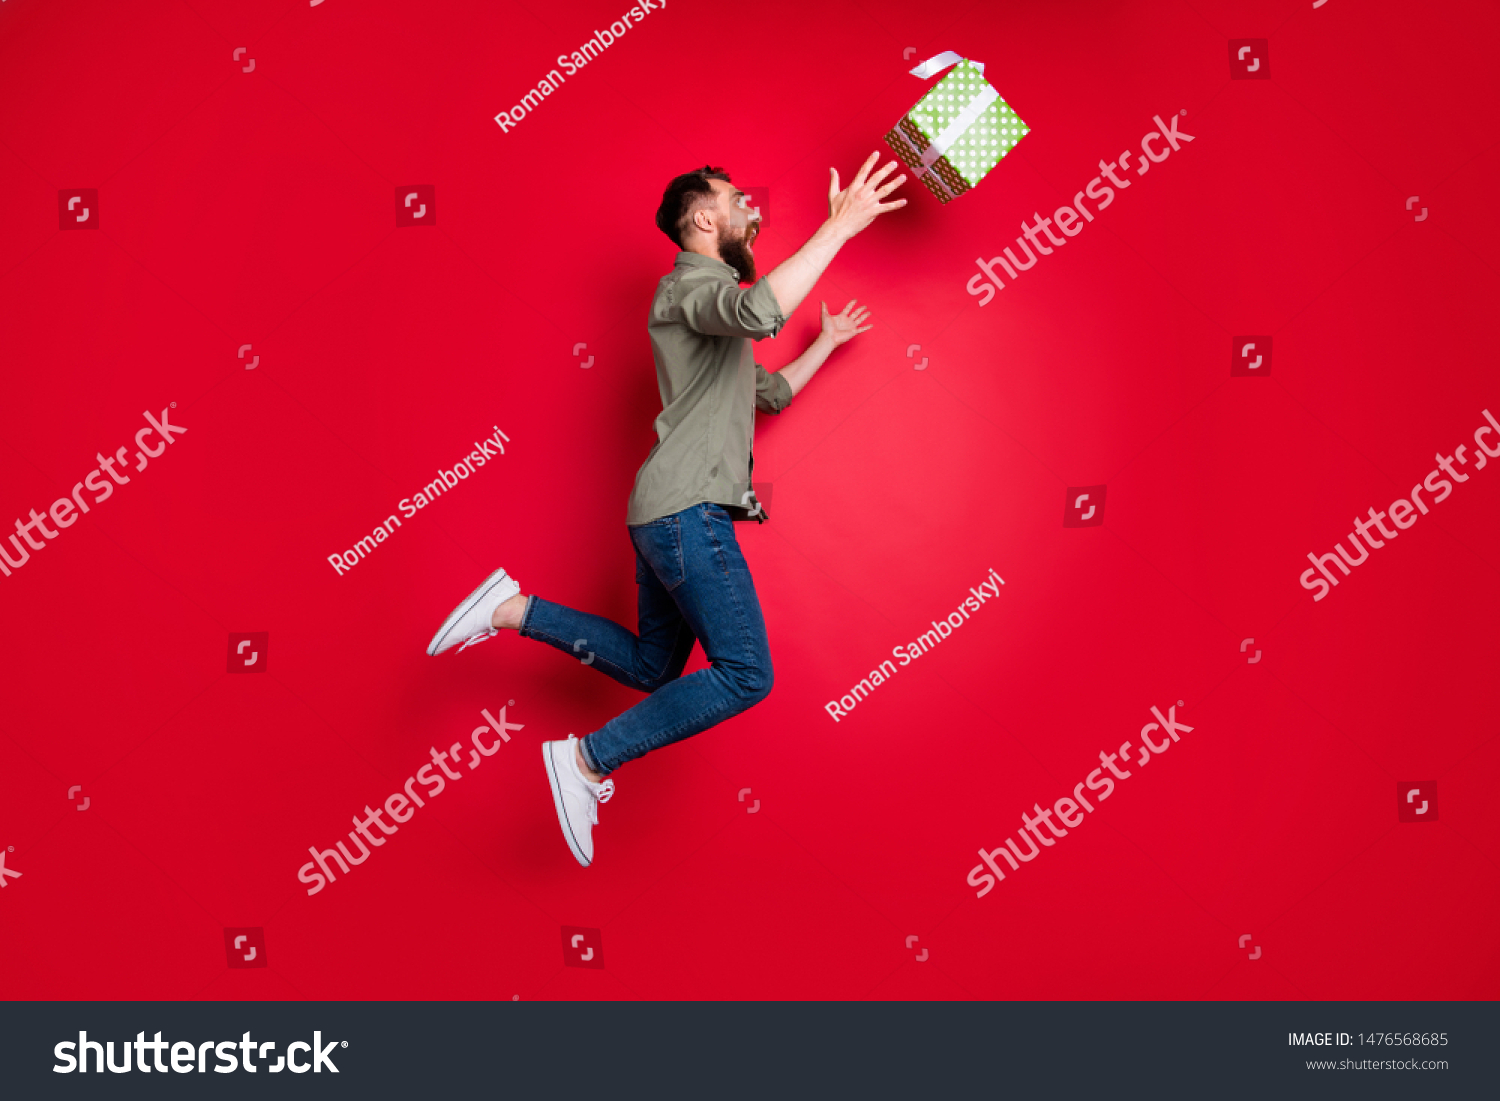 Full length body size photo of man trying to catch his prize gift while isolated with red background #1476568685